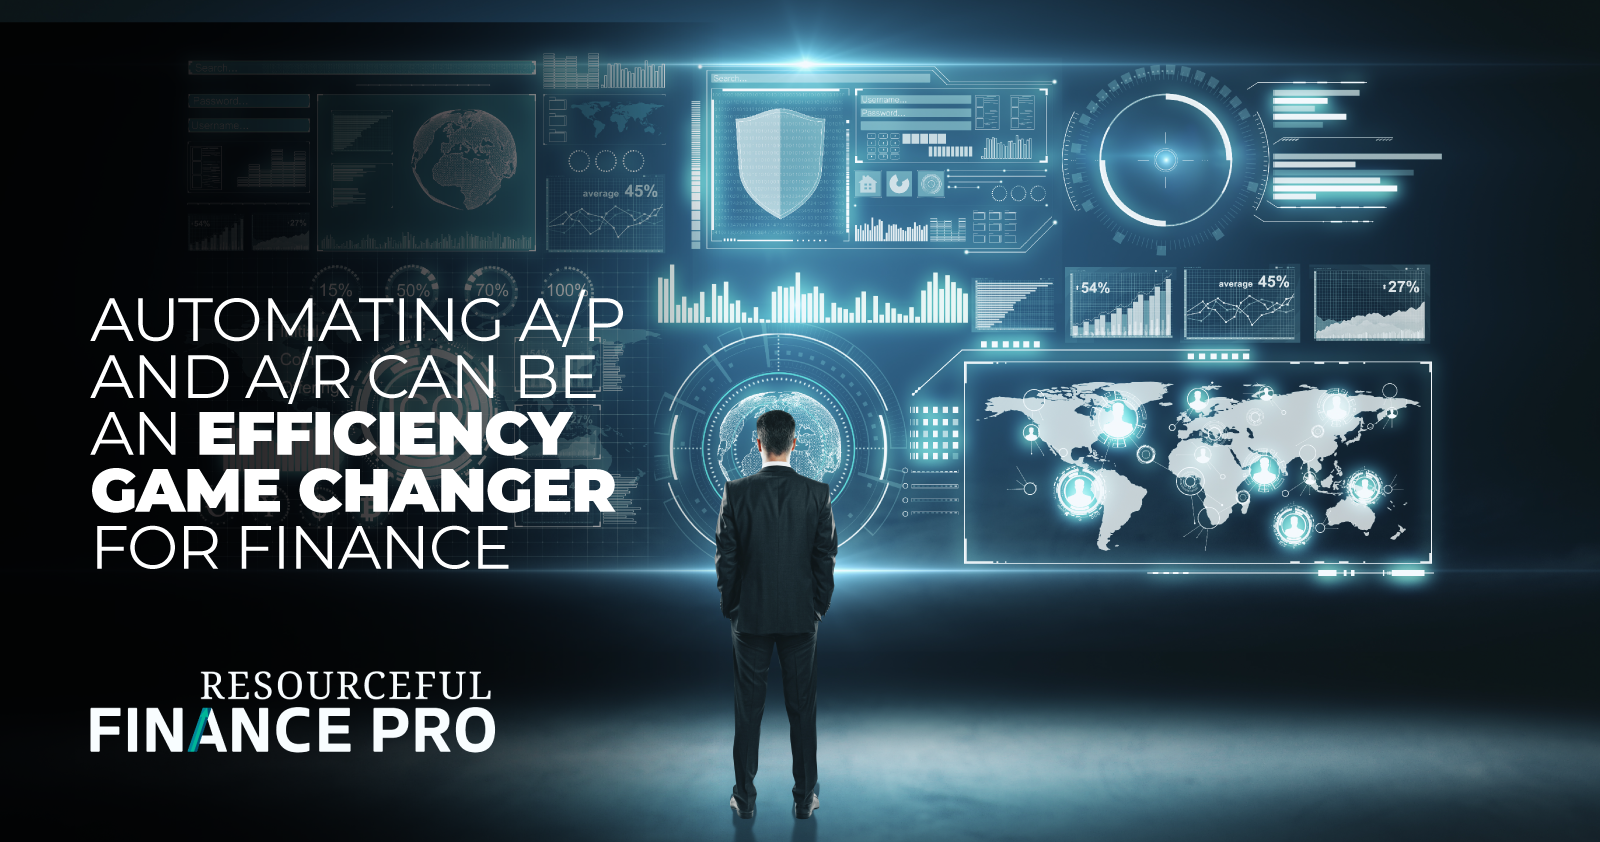 Automating A/P And A/R Can Be An Efficiency Game Changer For Finance